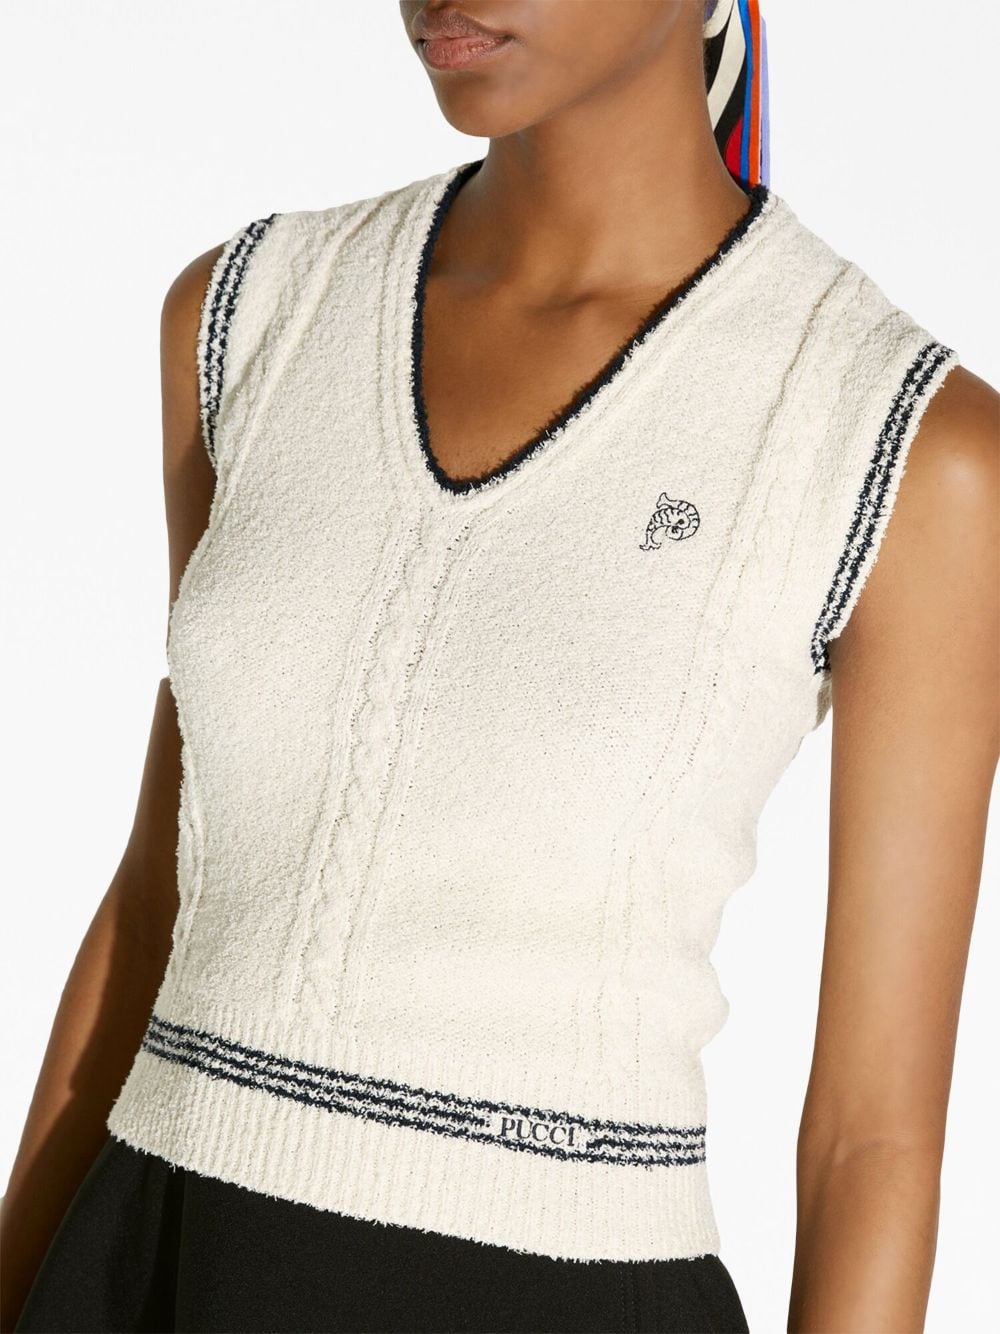 PUCCI cable-knit Embroidered Vest - Farfetch